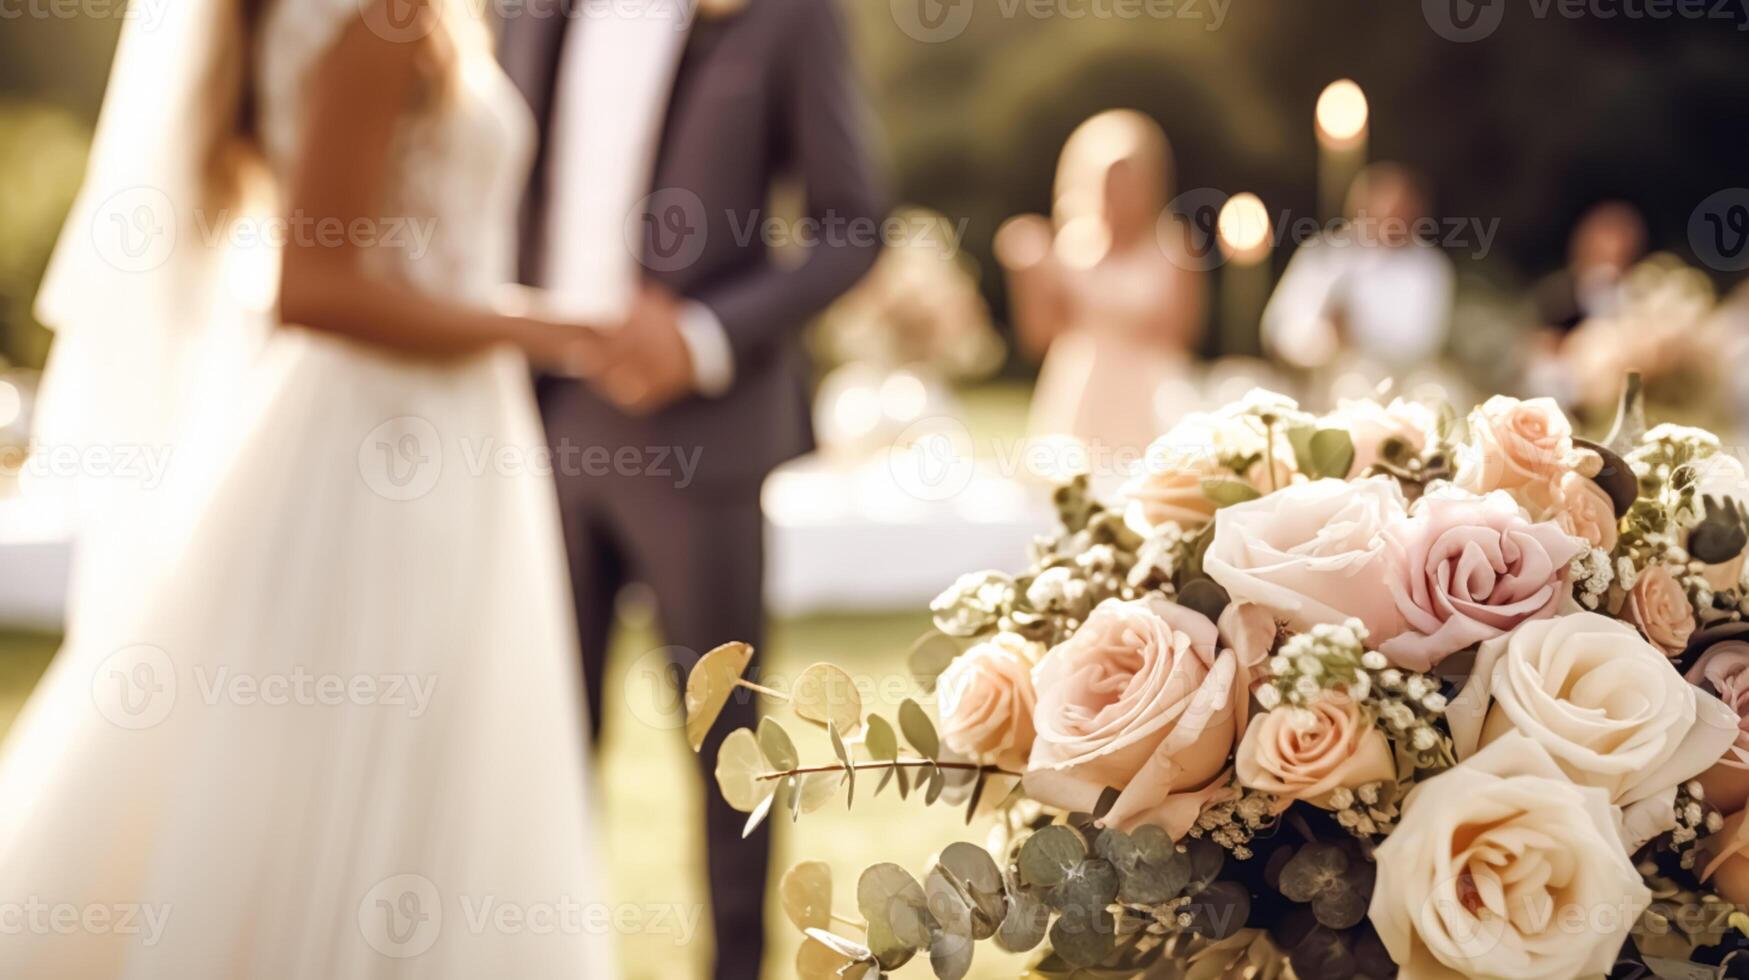 Wedding ceremony and celebration, bride and groom at a beautiful outdoor venue on a sunny day, luxury wedding decor with flowers and bridal bouquet, photo